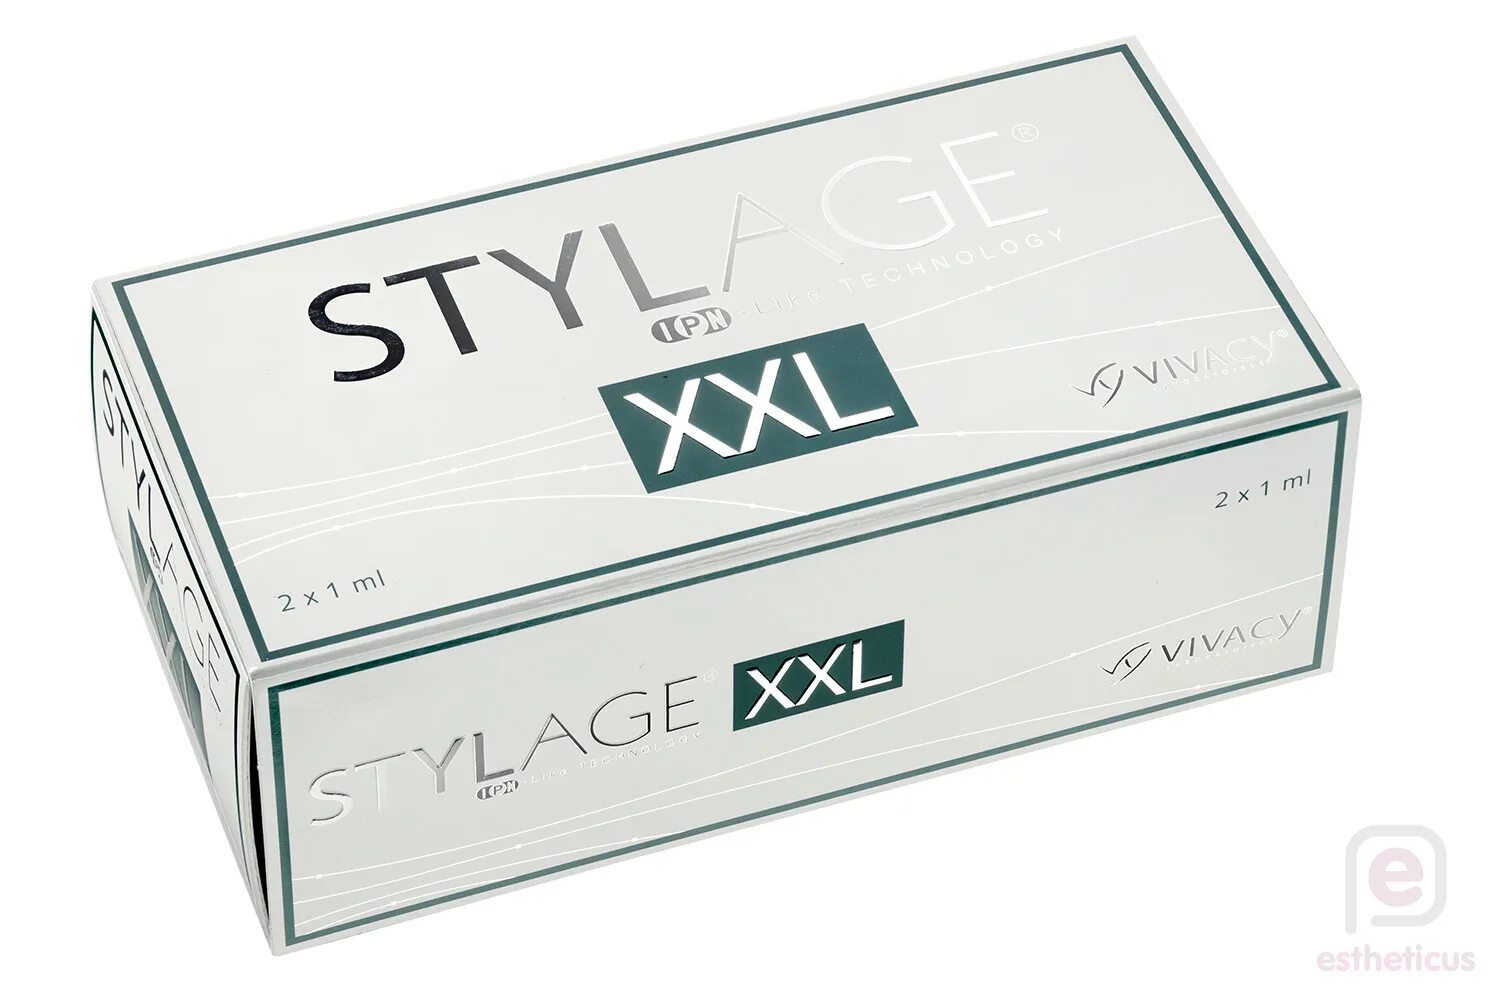 Stylage m цена. Vivacy Stylage XXL. Stylage XL (1 мл). Стилаж Stylage филлер. Stylage m (1 мл).